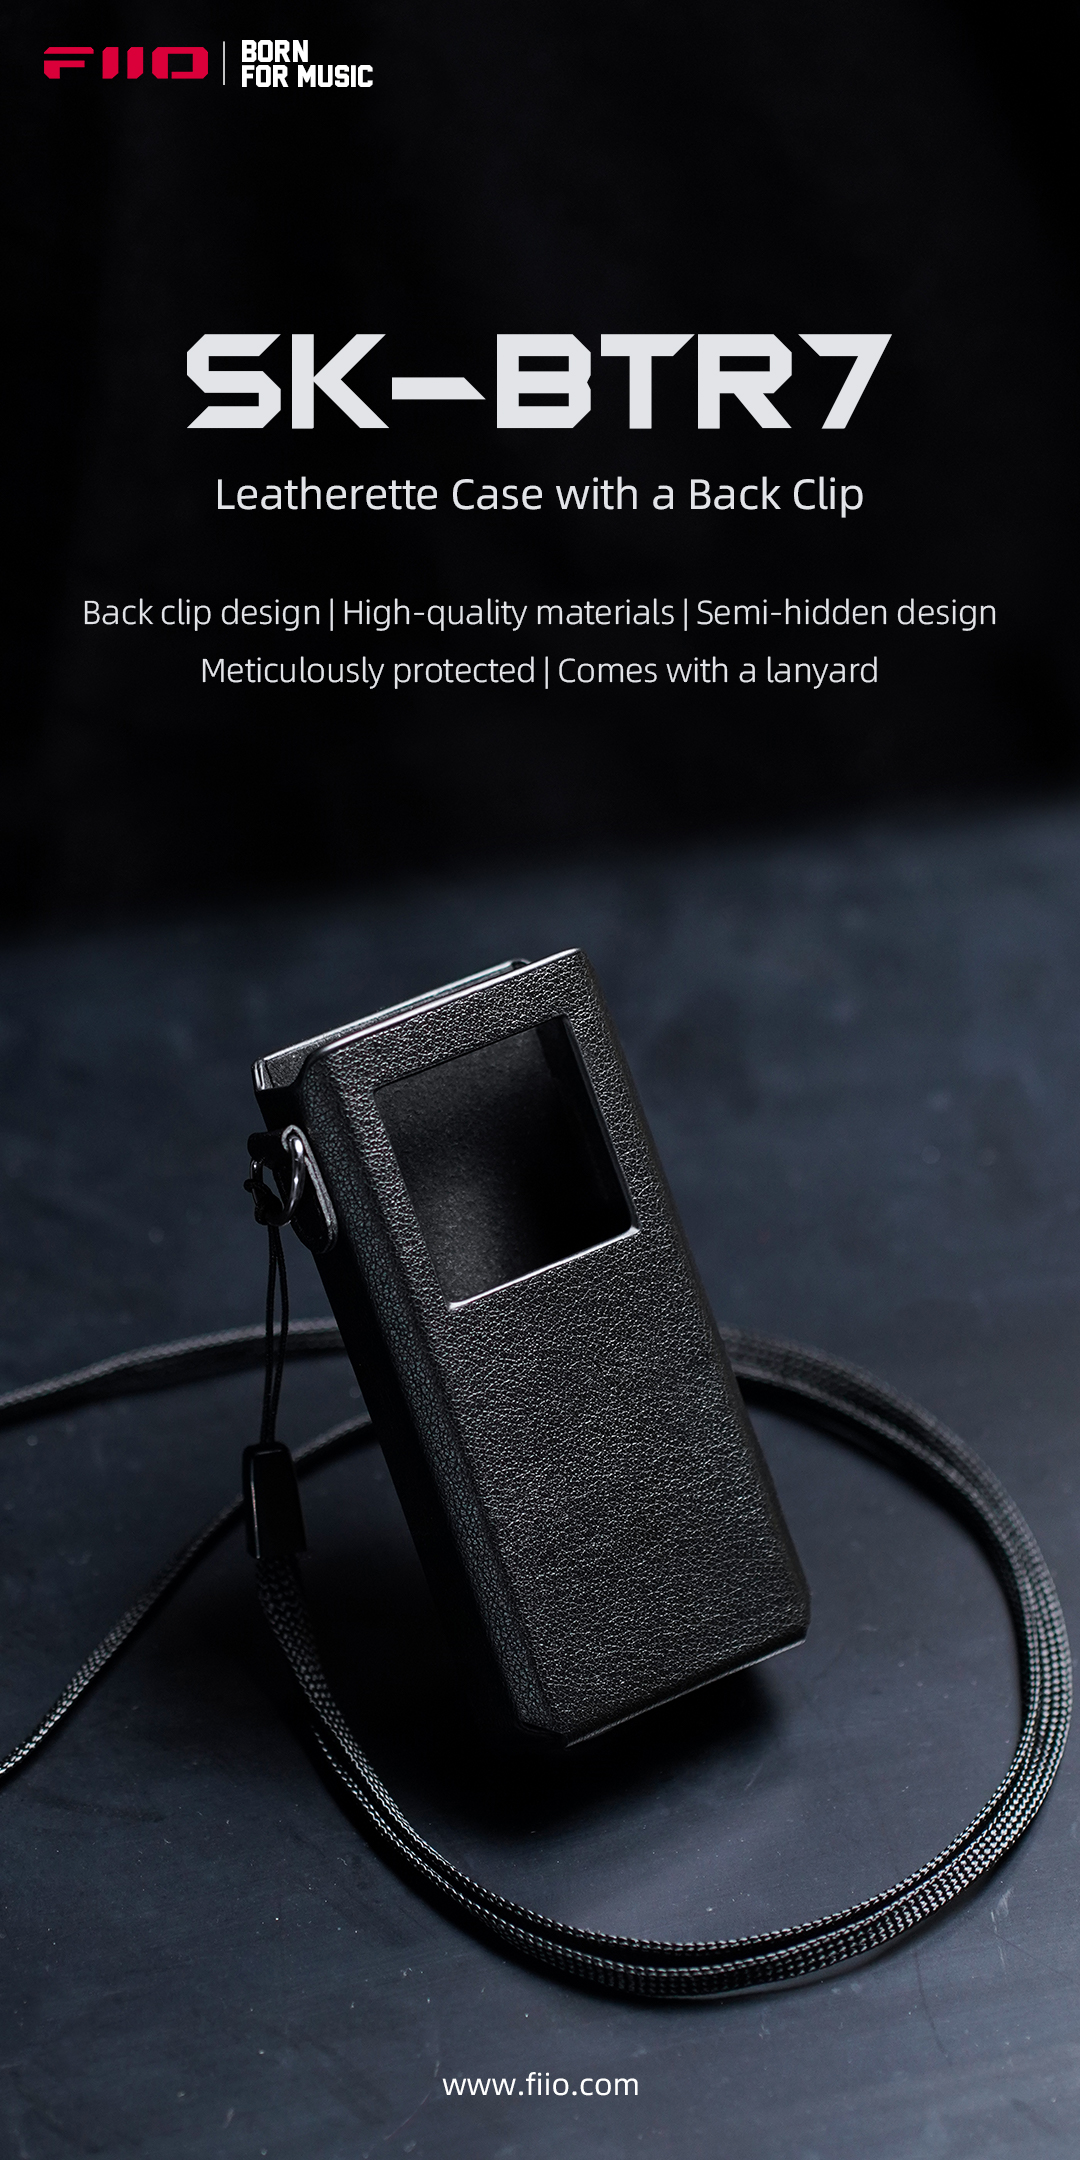 SK-BTR7 Exclusive Leatherette Case with a Back Clip for BTR7 Is Officially  Released!-FIIO---BORN FOR MUSIC